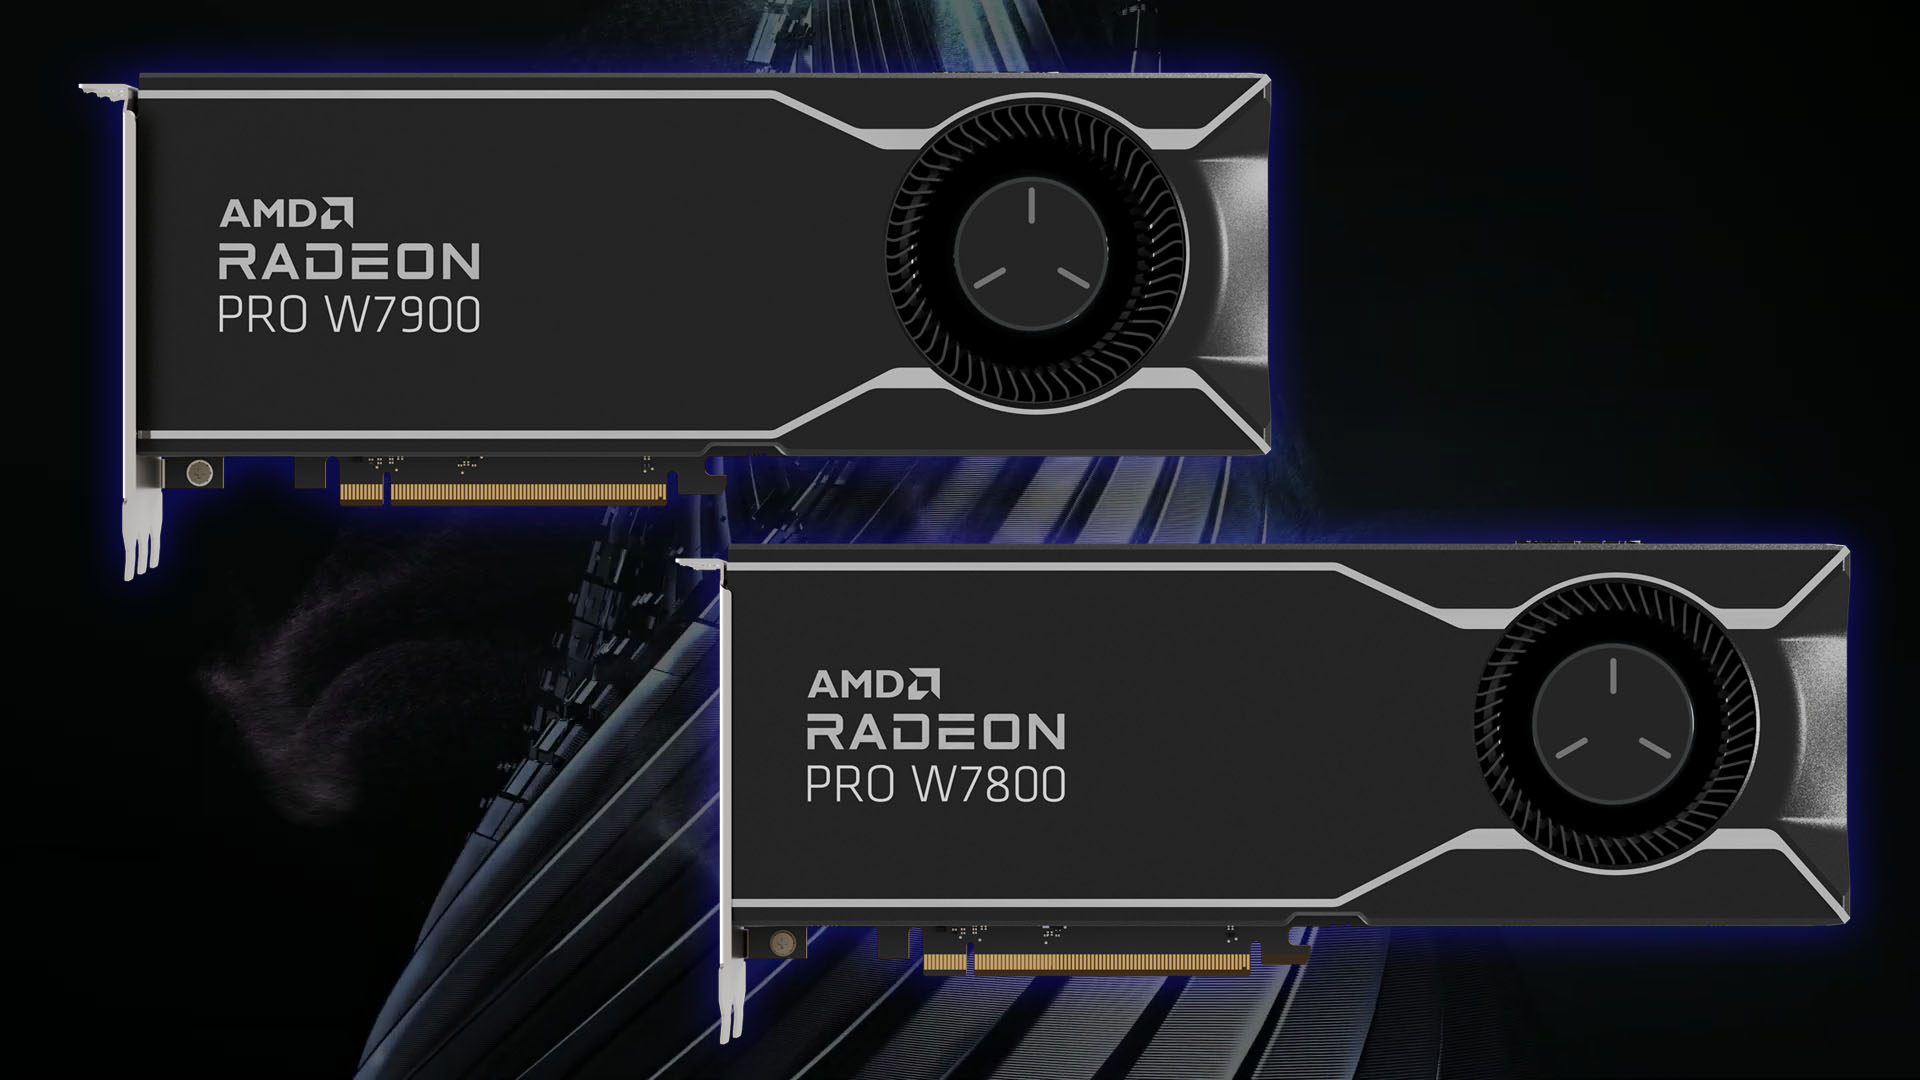 AMD Radeon PRO W7900 and W7800 Workstation Graphics Cards